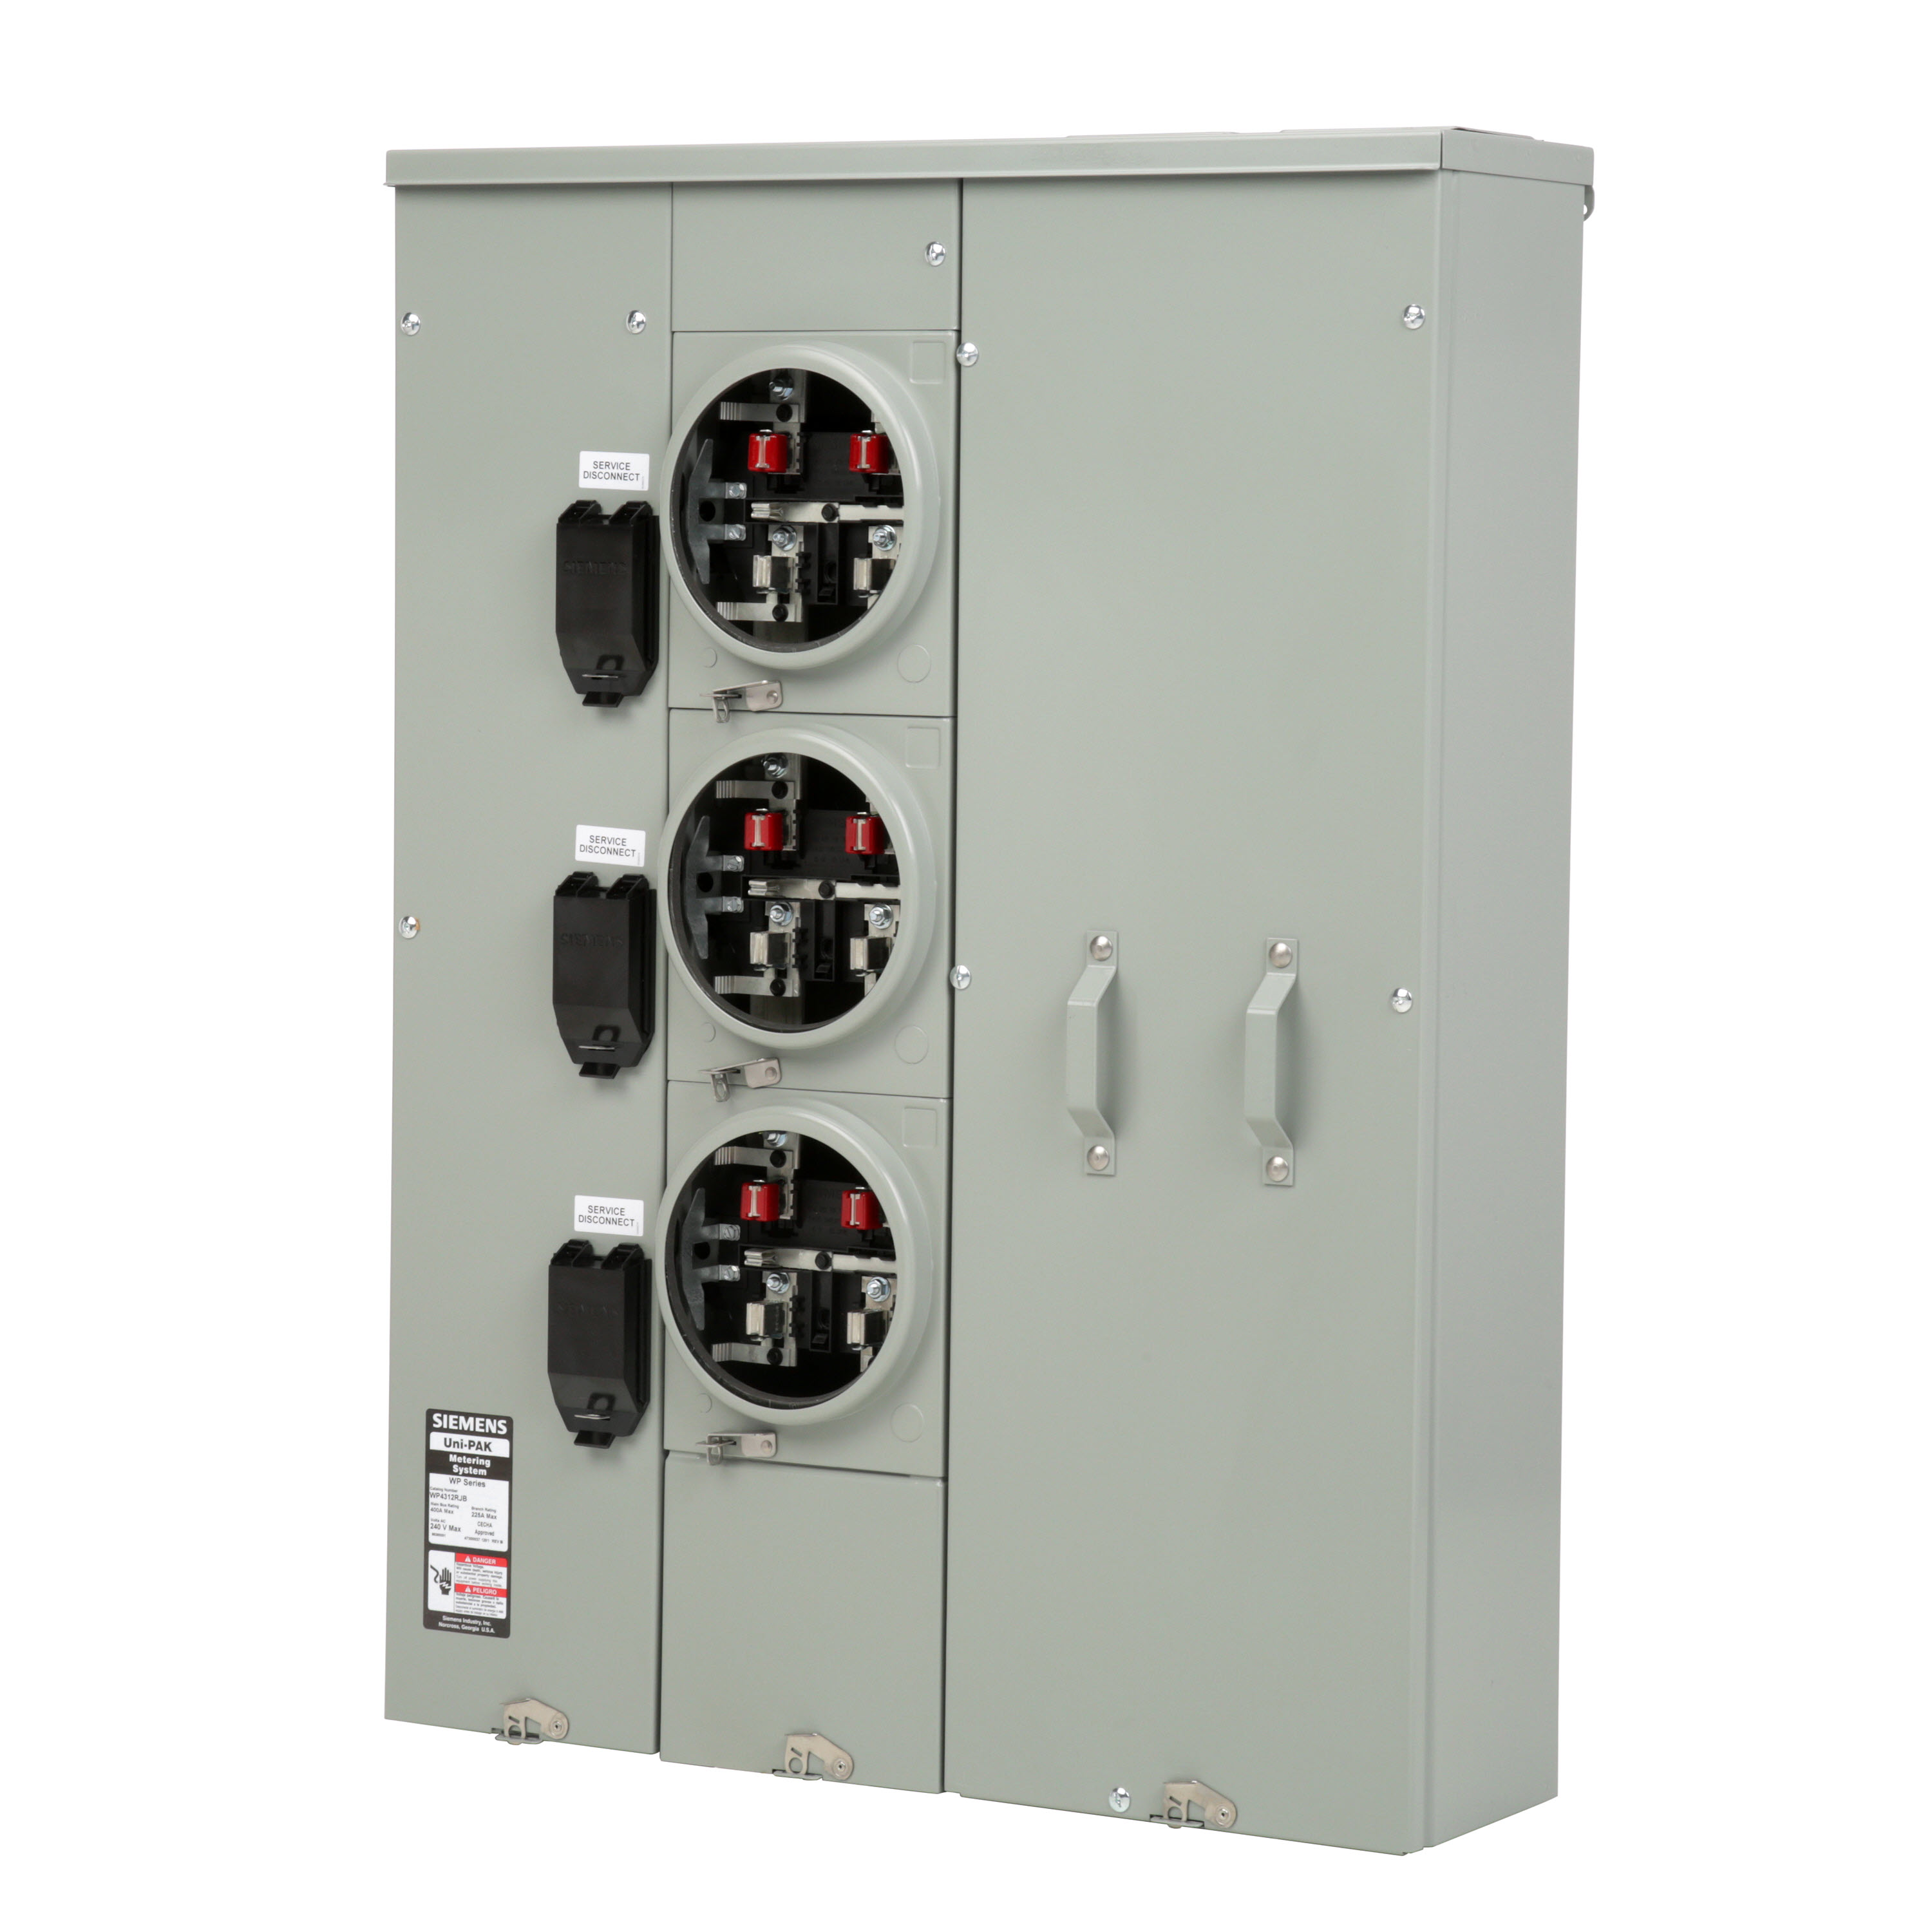 Siemens Low Voltage s Multi-Family Metering Line of PAK Metering Standard 225A as part of the PAK Metering Standard 225A Group. Type UNI-PAK Features HORN BYPASS Appn GARDEN - STYLE Std UL-50,67,414 V. Rating 120/240V A. Rating 400A Phase 1PH Size 9.00 x 28.79 x 39.630 No. Of Cutouts 11 Cutout Size 1 x (1/2,3/4,1,1-1/4 ), 6 x (2-1/2,2 ,1-1/2,1-1/4,1 ), 2 x (4,3-1/2,3,2-1/2,2 ), 2X4 Cable Entry TOP OR BOTTOM FEED Terminal 3X2 STUDS. Insulated.Appn . Wall Mounted. Enclosure RINGLESS